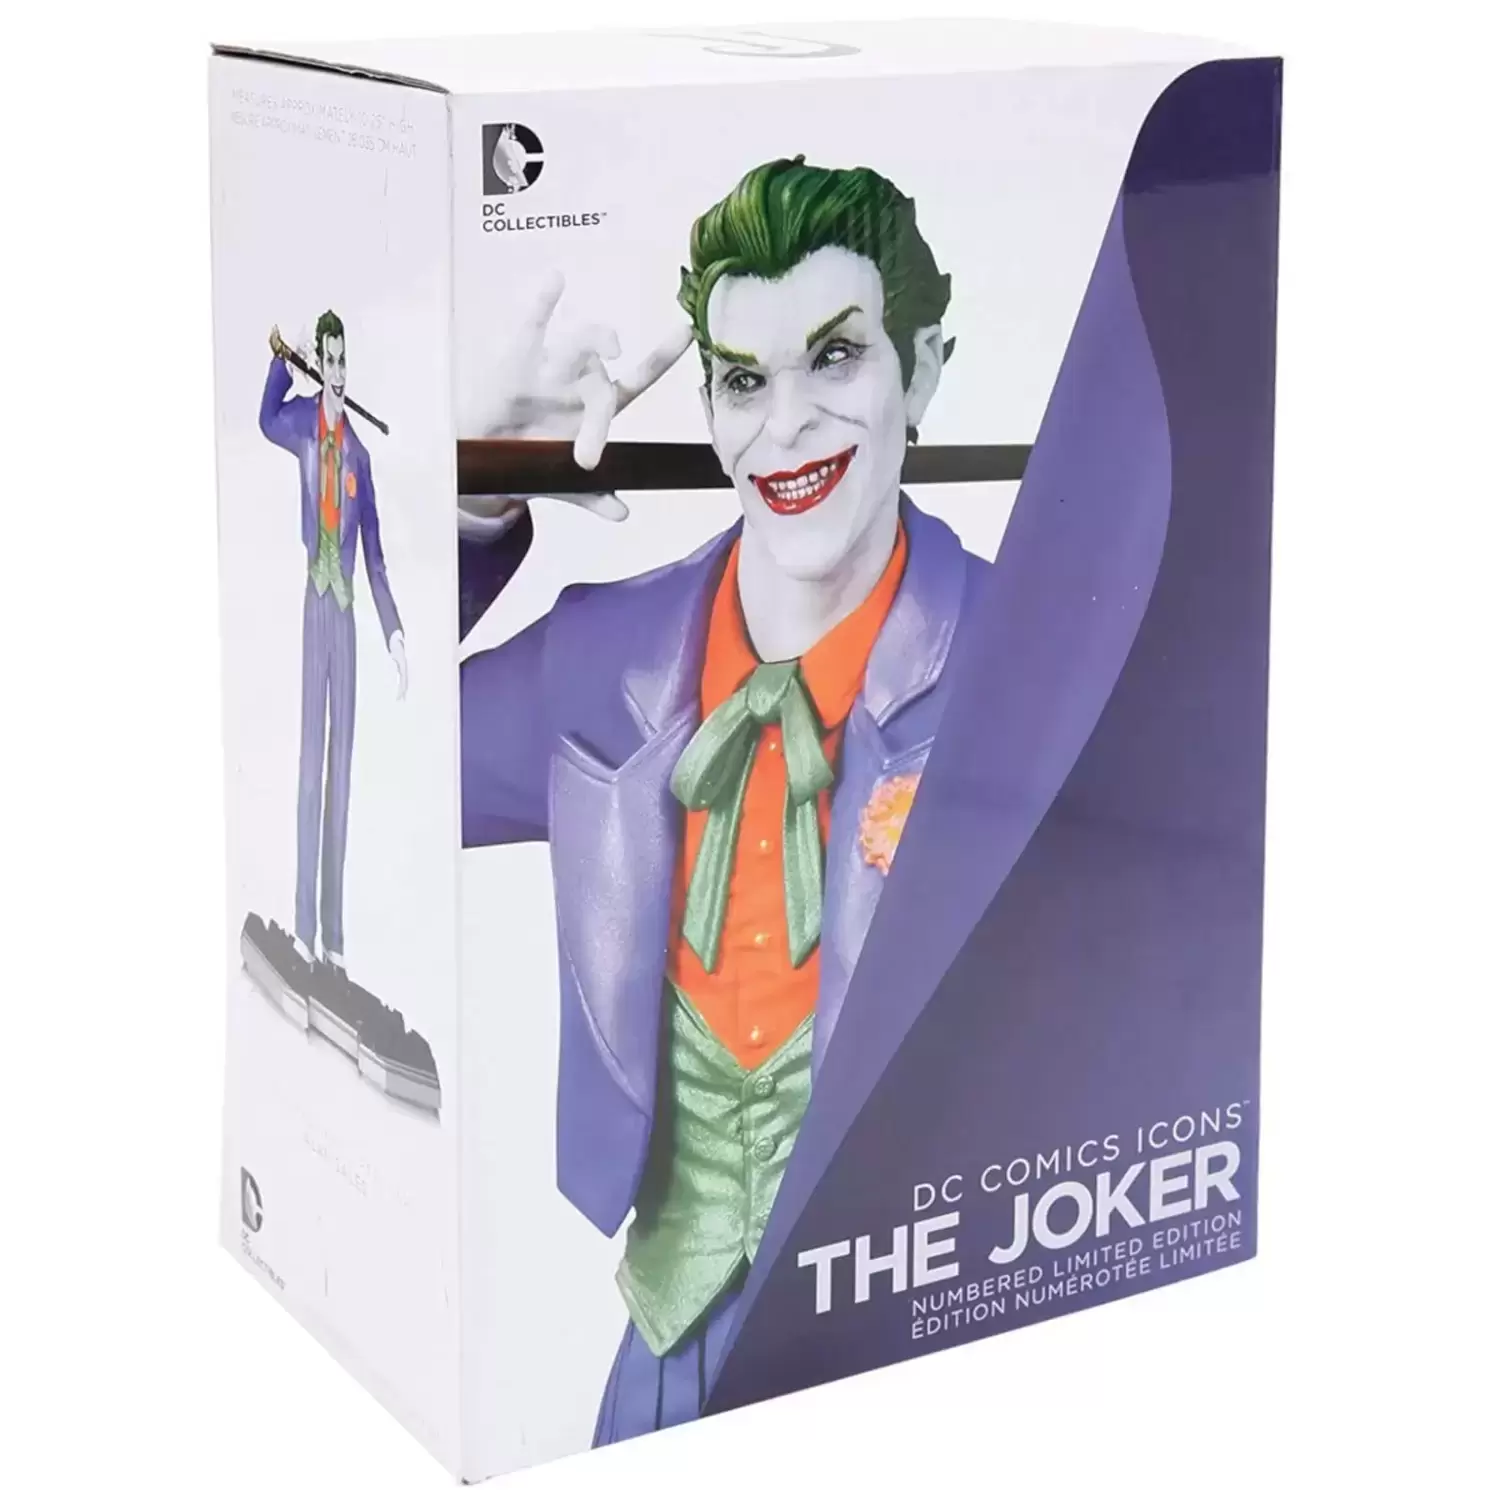 DC Collectibles Statues - The Joker - DC Comics Icons